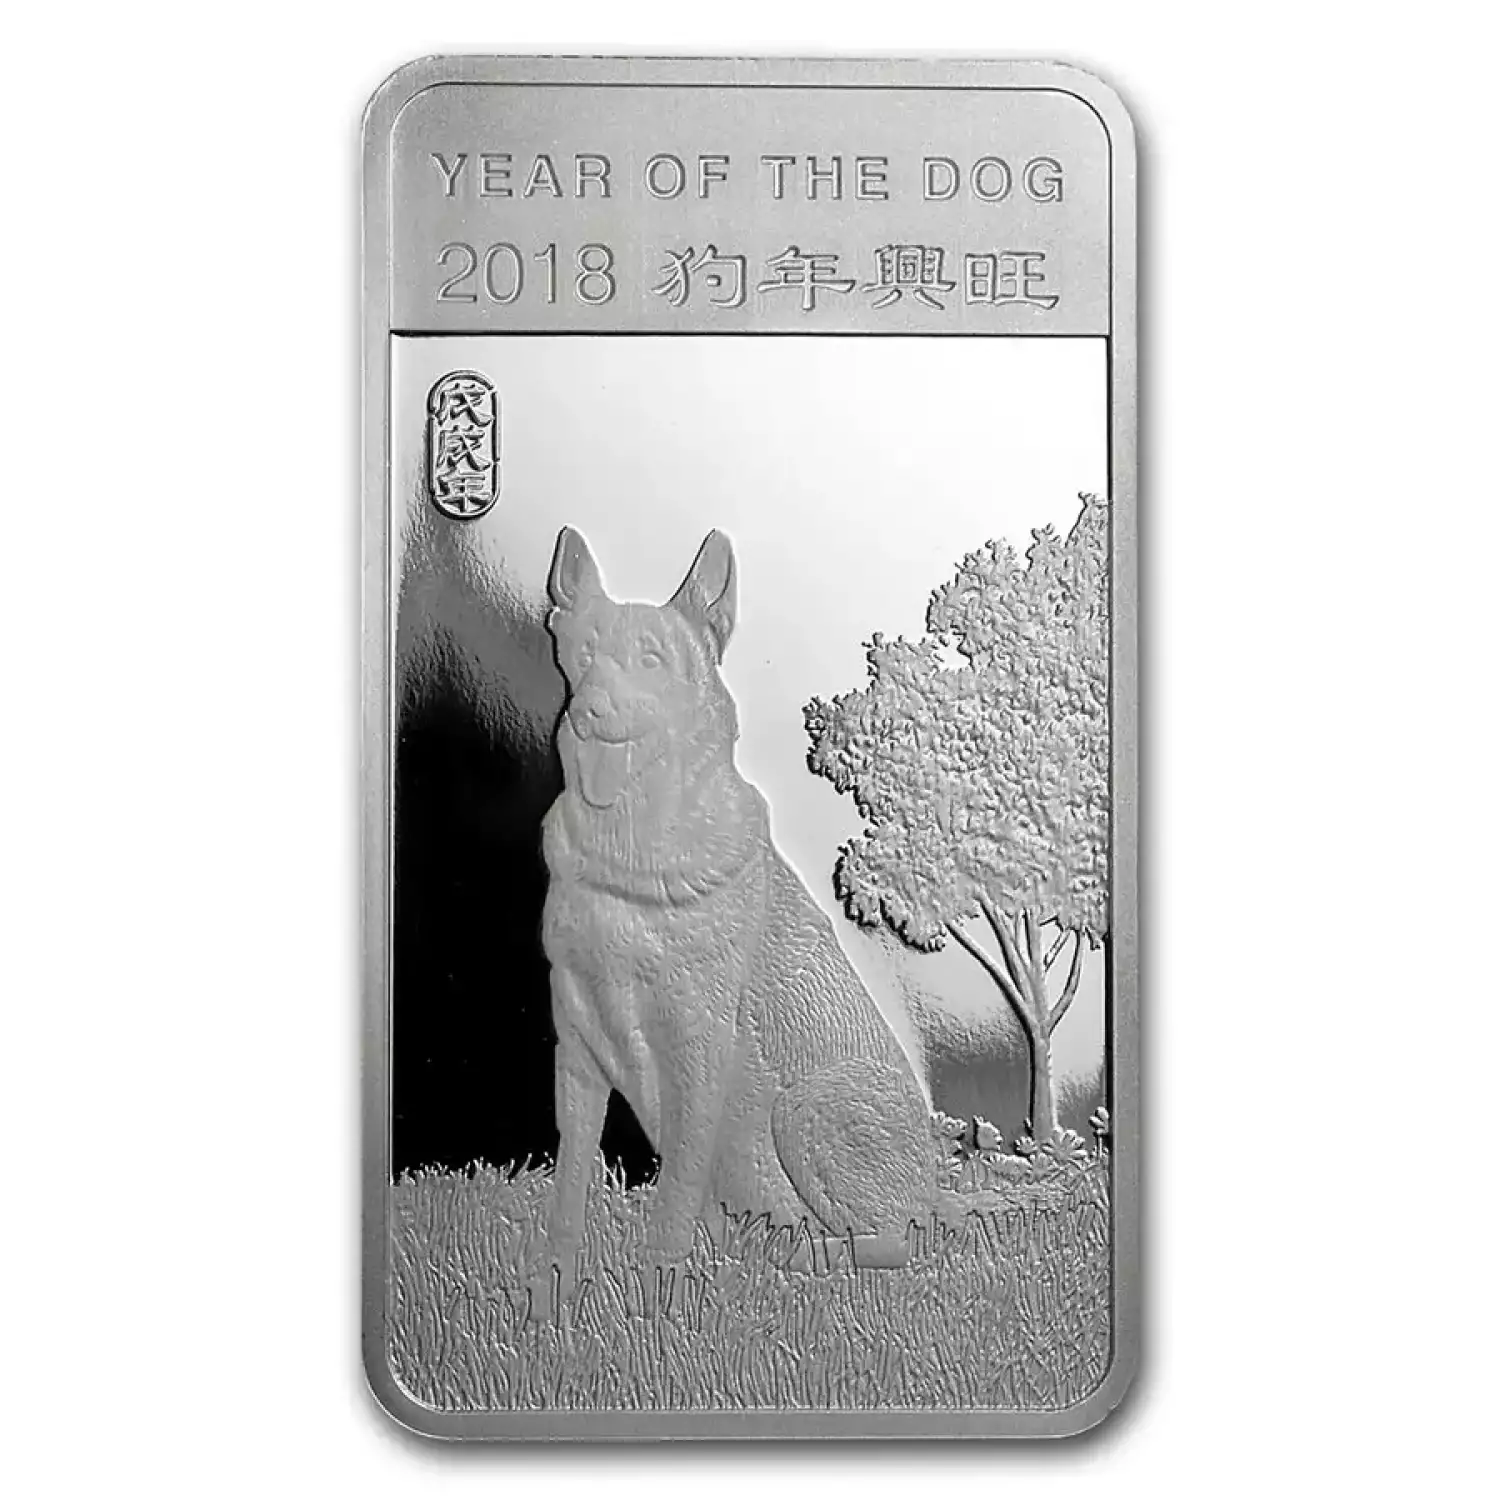 1/2 oz Silver Bar - APMEX 2018 Year of the Dog (Secondary Market)